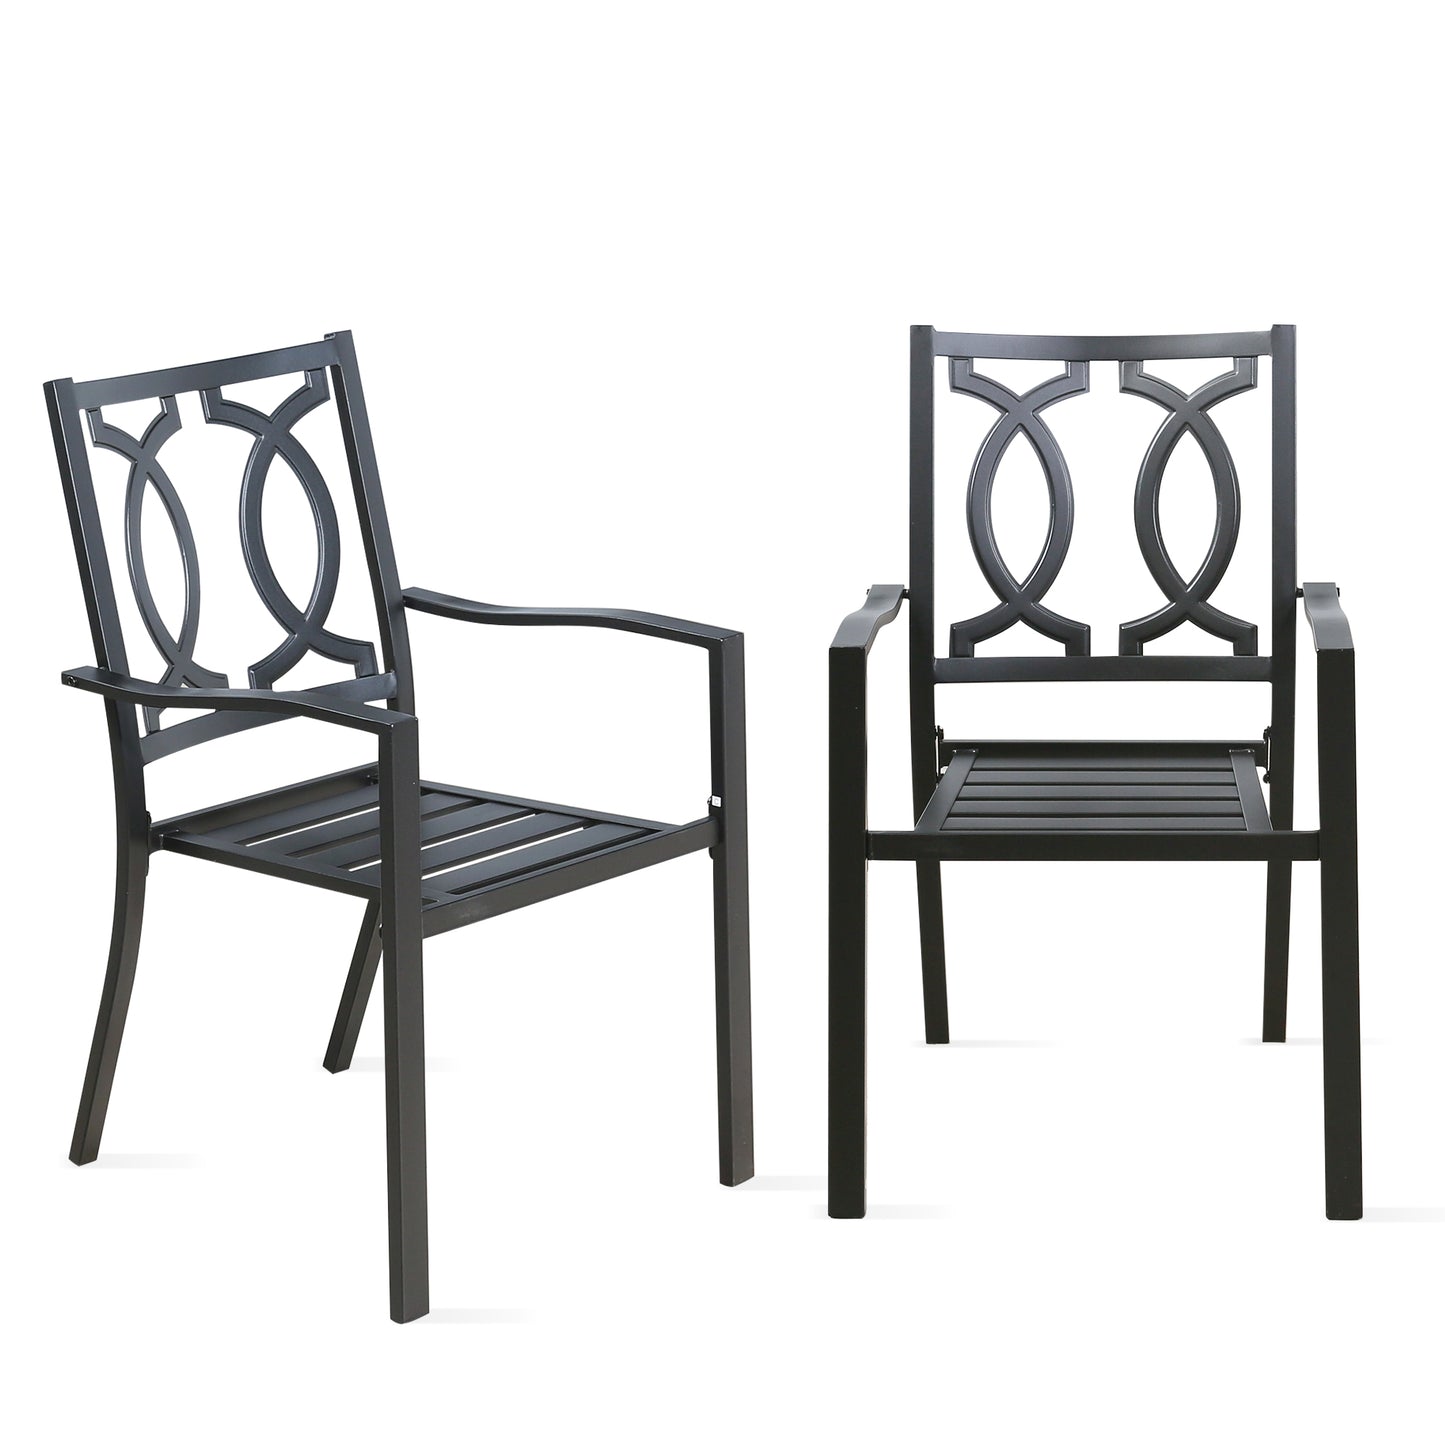 Outdoor Patio Dining Arm Chairs Steel Slat Seat Stacking Garden Chair (Set of 2)